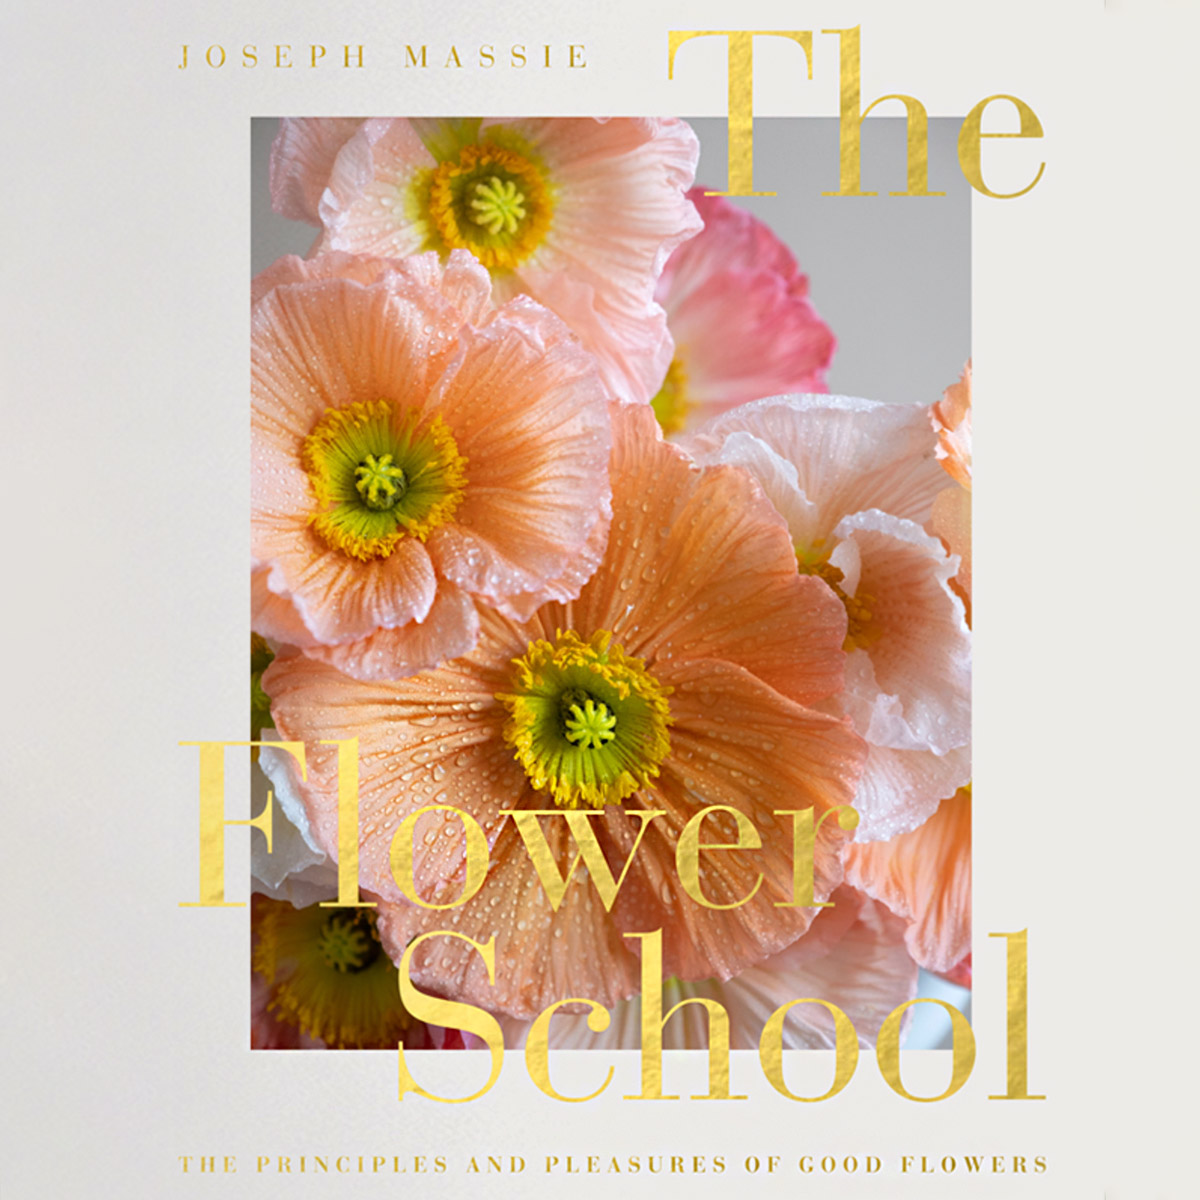 joseph-massie-takes-you-by-the-hand-in-his-new-book-the-flower-school-featured